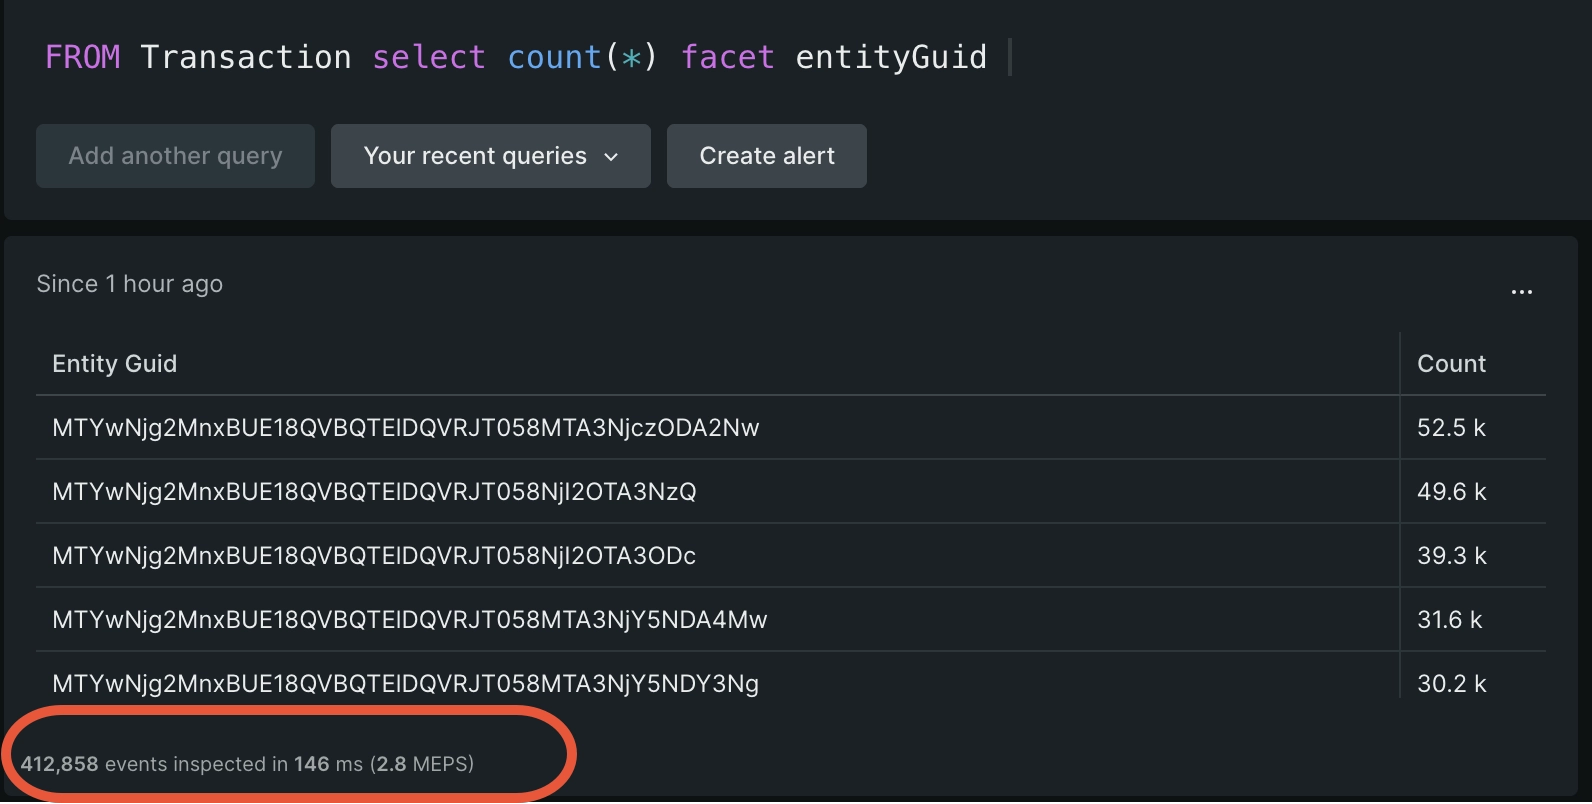 New Relic inspected event count